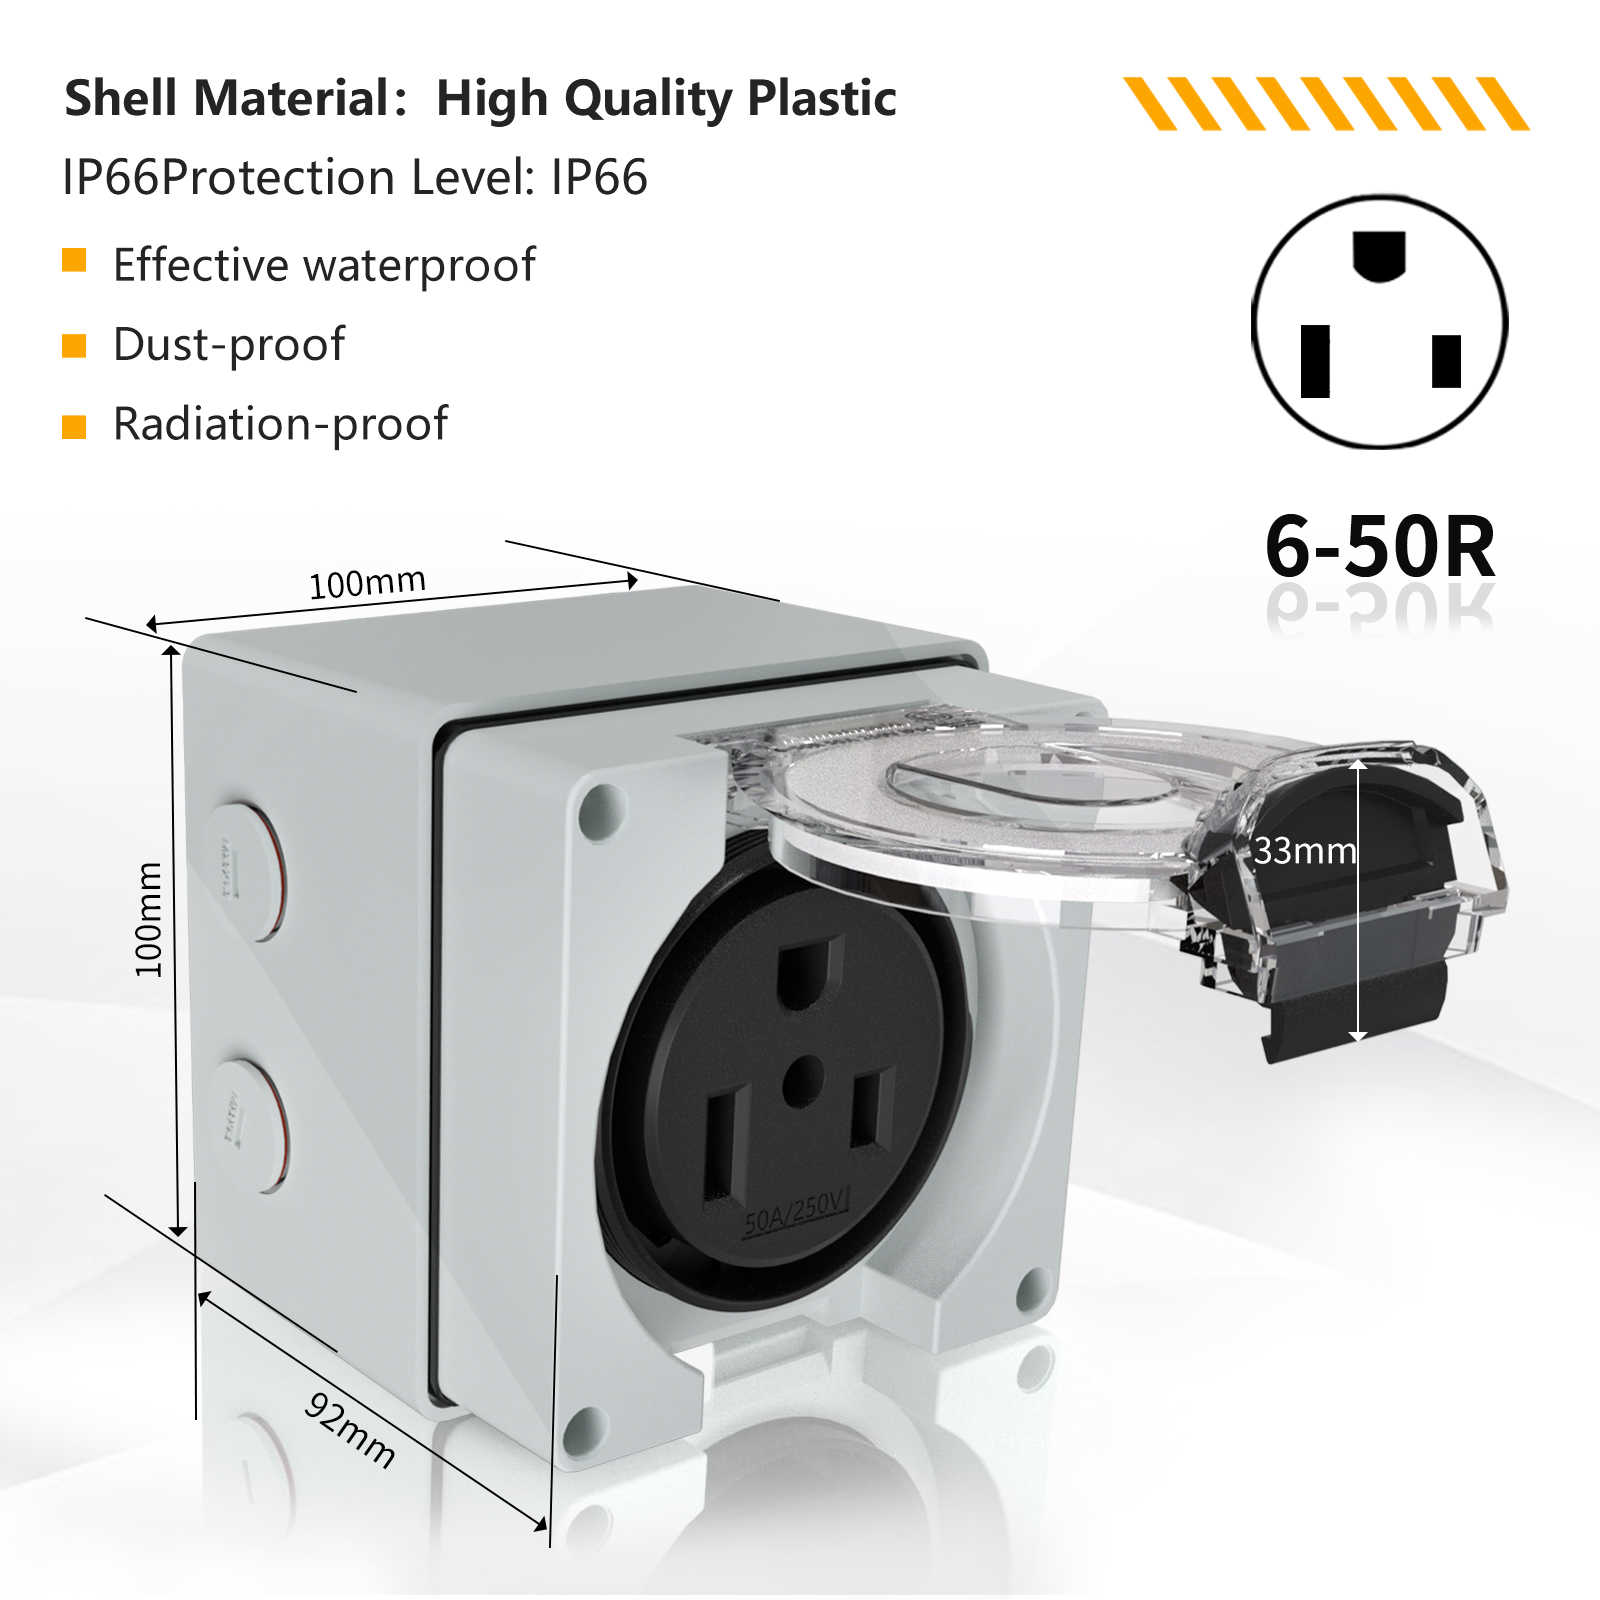 6-50R 50Amp power outlet box demension drawing waterproof dust proof radiation proof